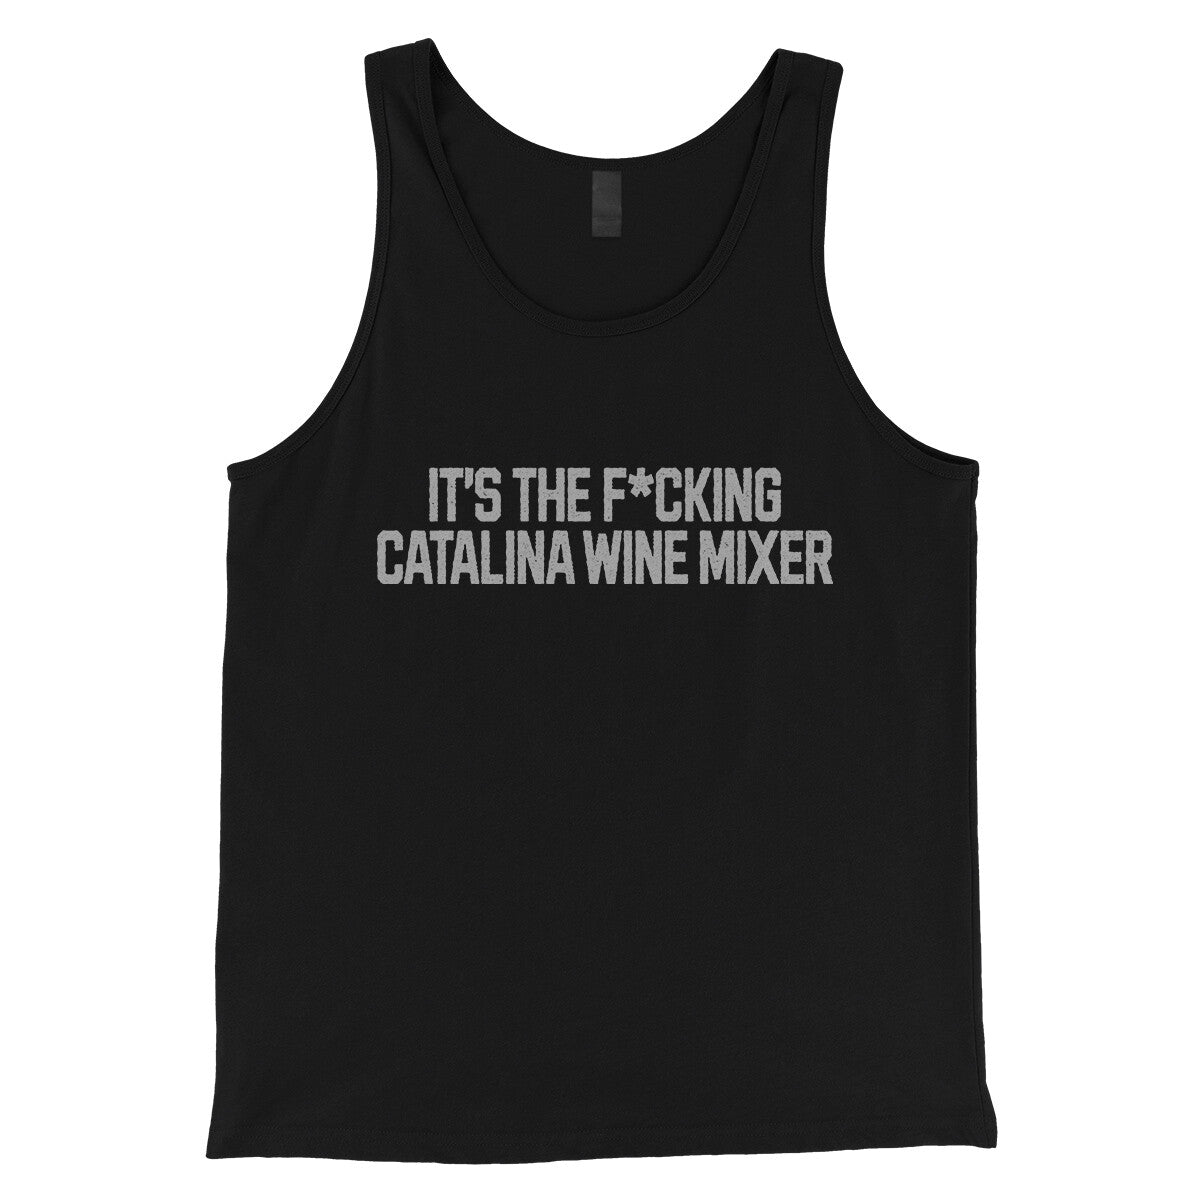 It's the Fucking Catalina Wine Mixer in Black Color